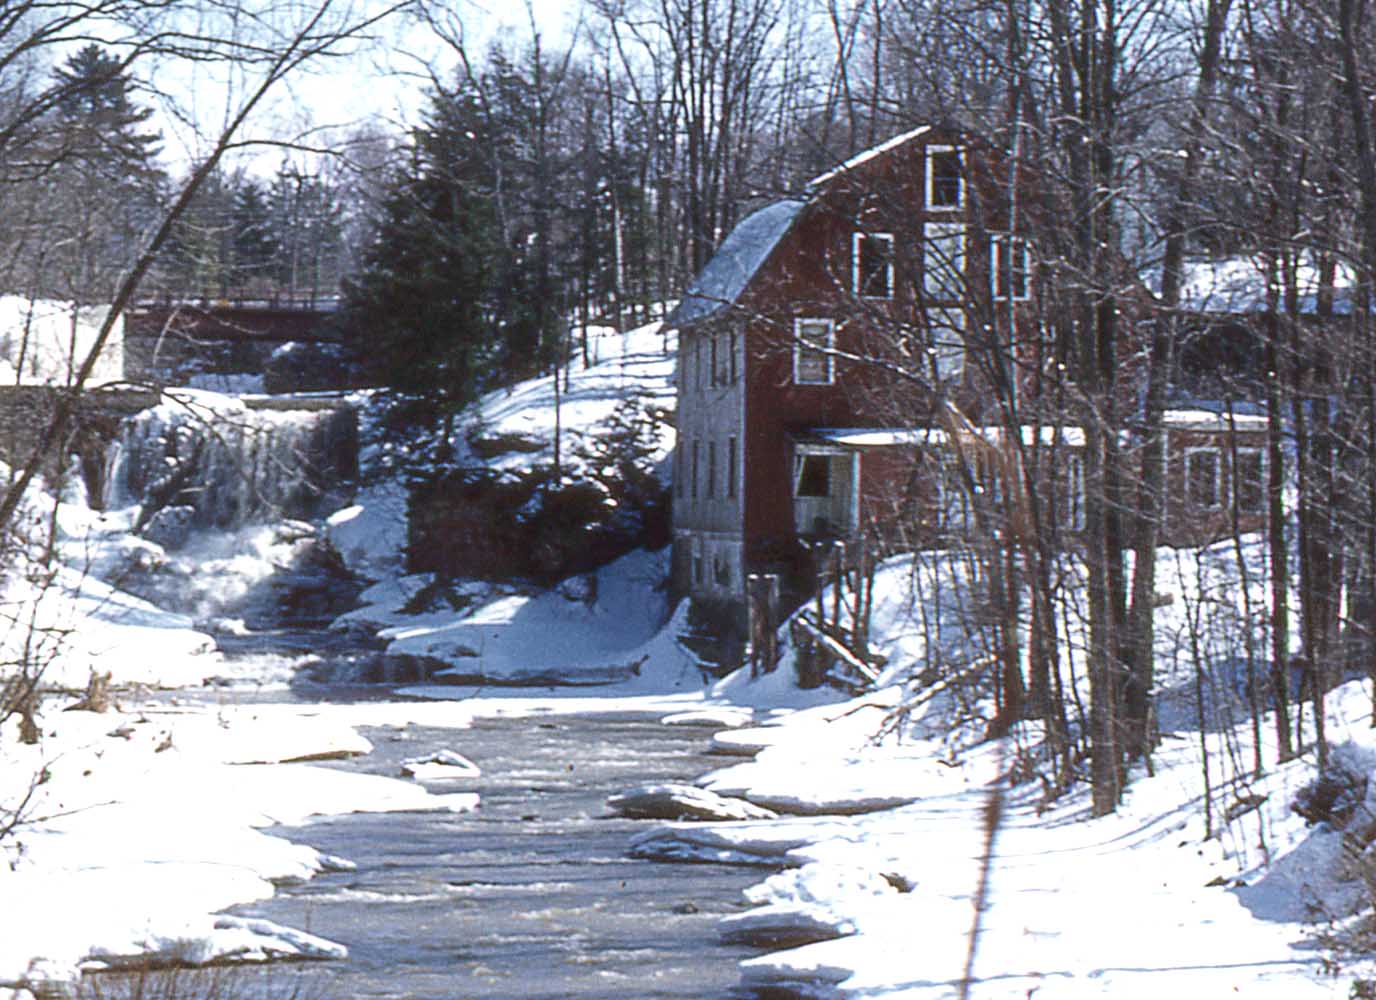 The Old Mill and Vorhis' Falls